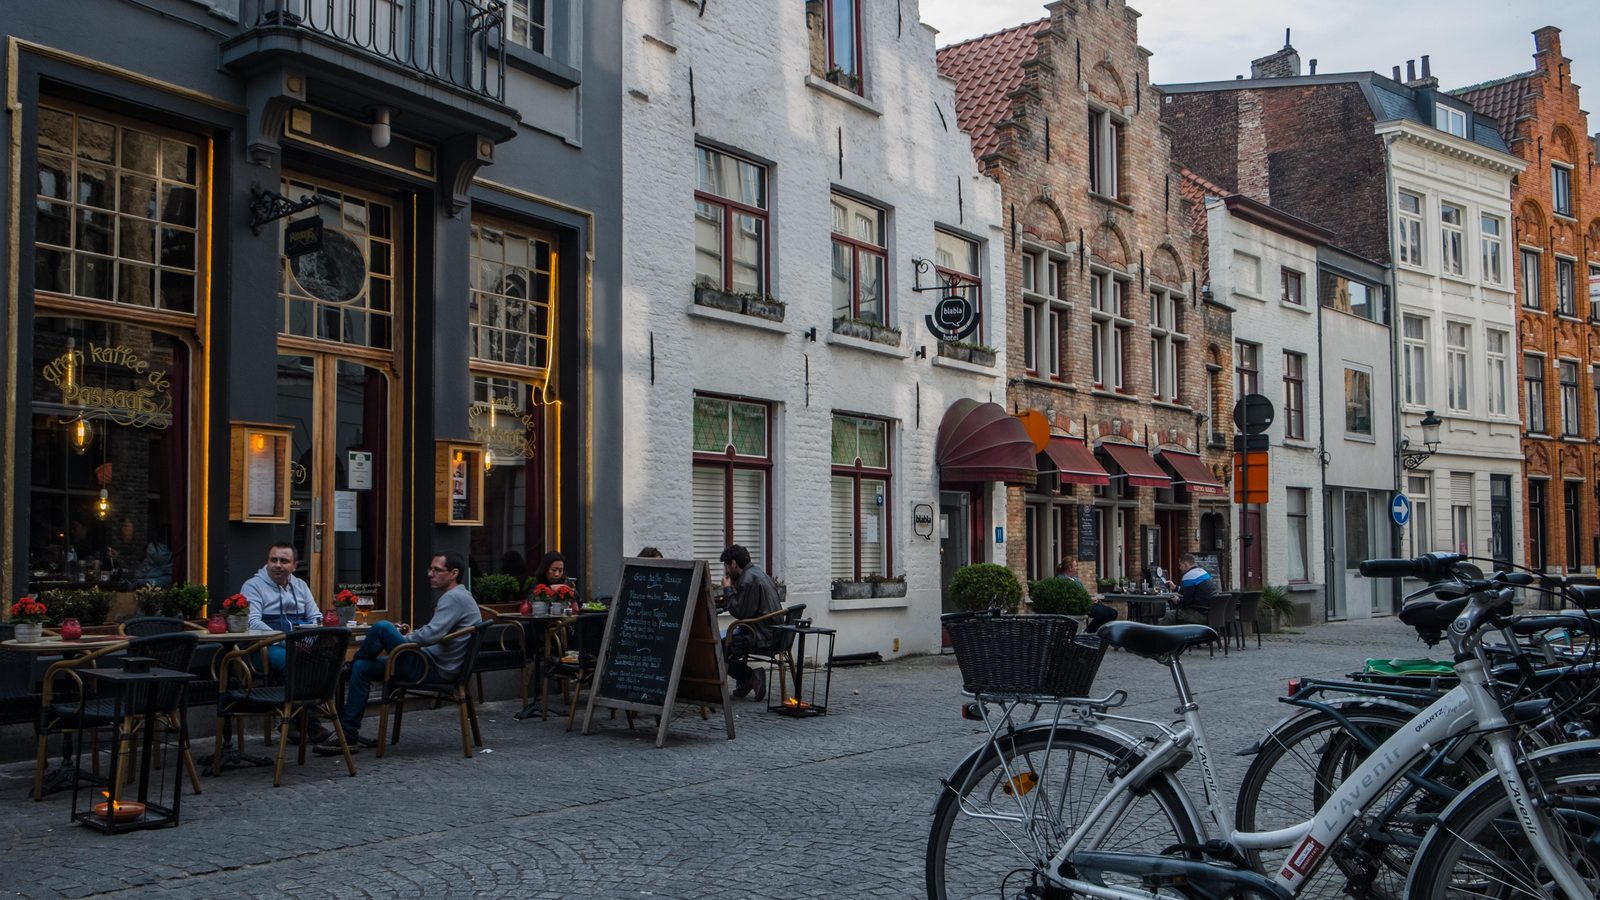 Shoppingstreets of  Brugge